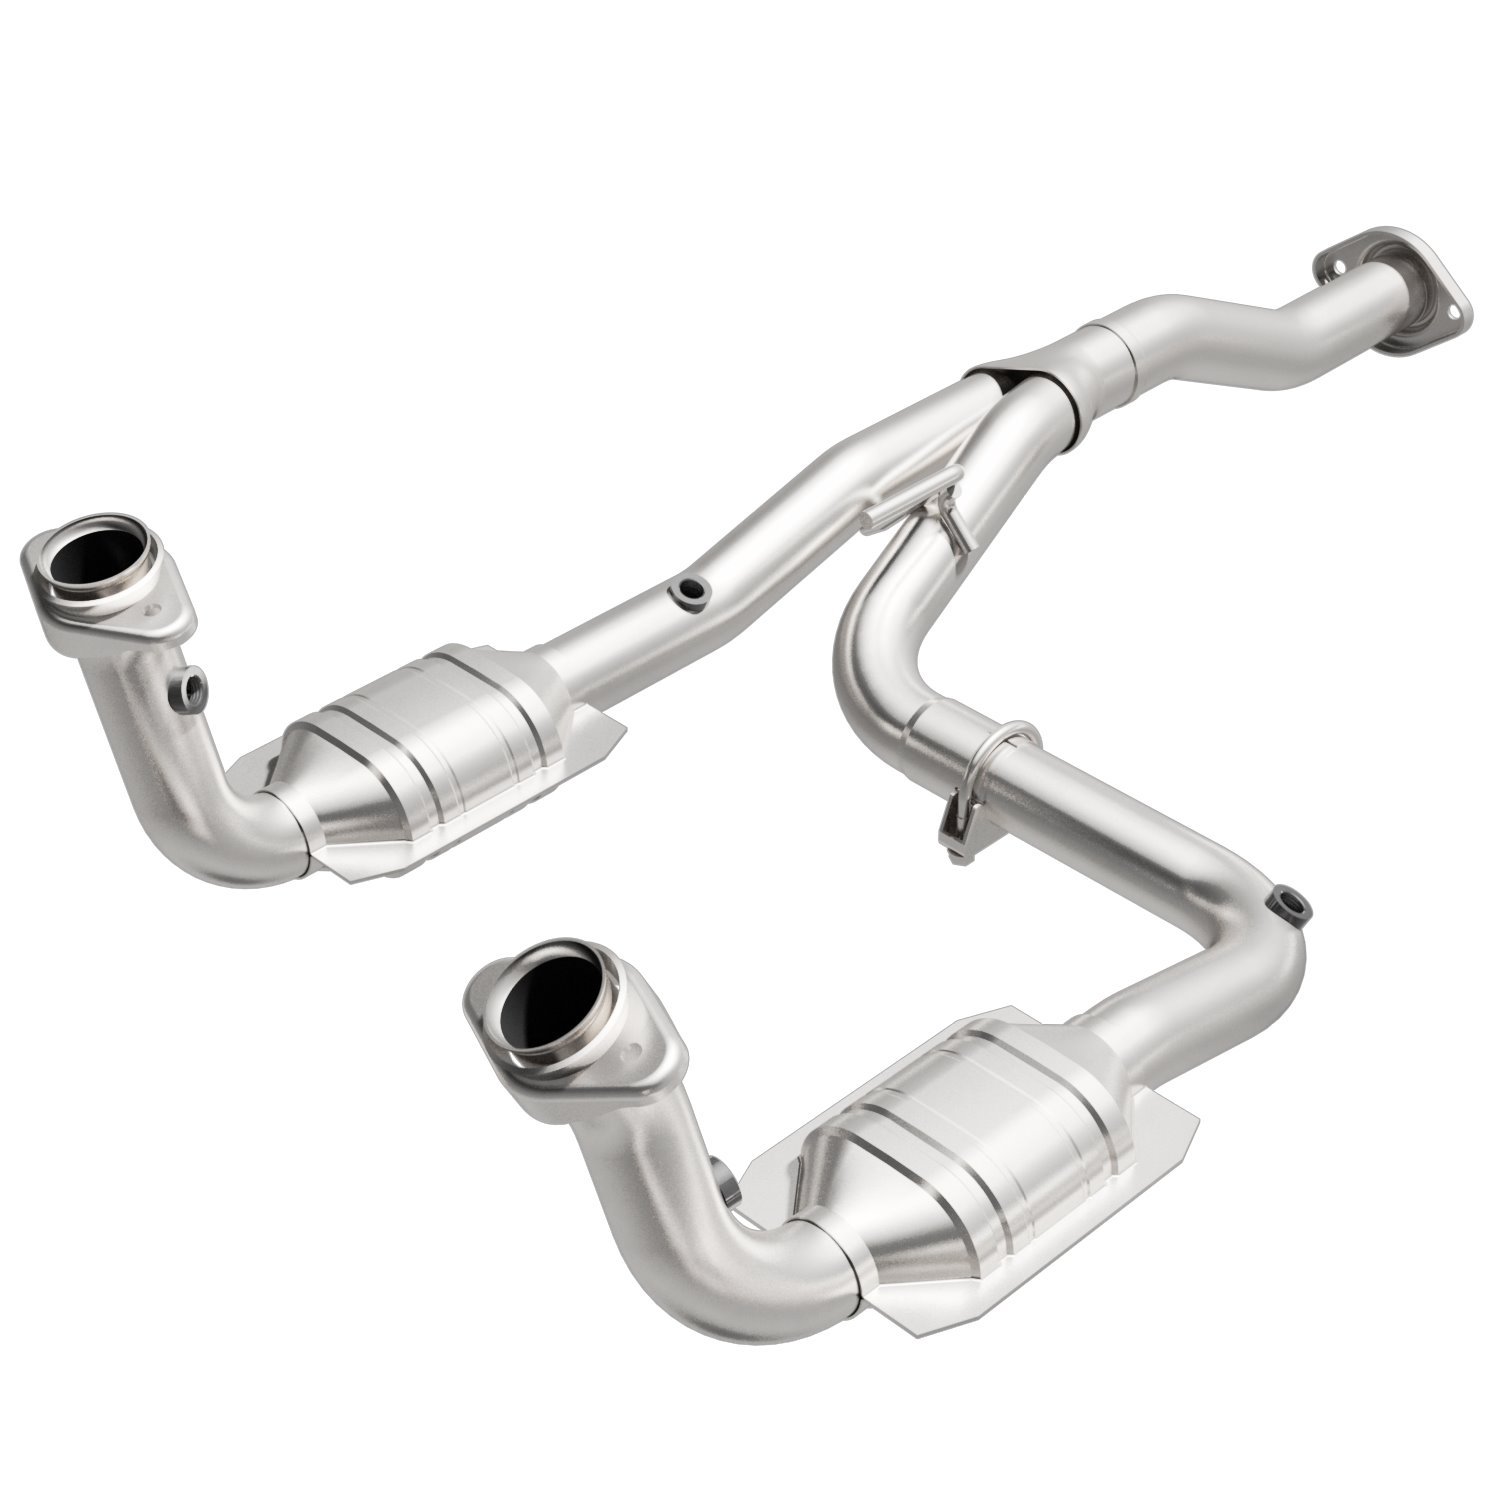 2005-2007 Jeep Liberty HM Grade Federal / EPA Compliant Direct-Fit Catalytic Converter